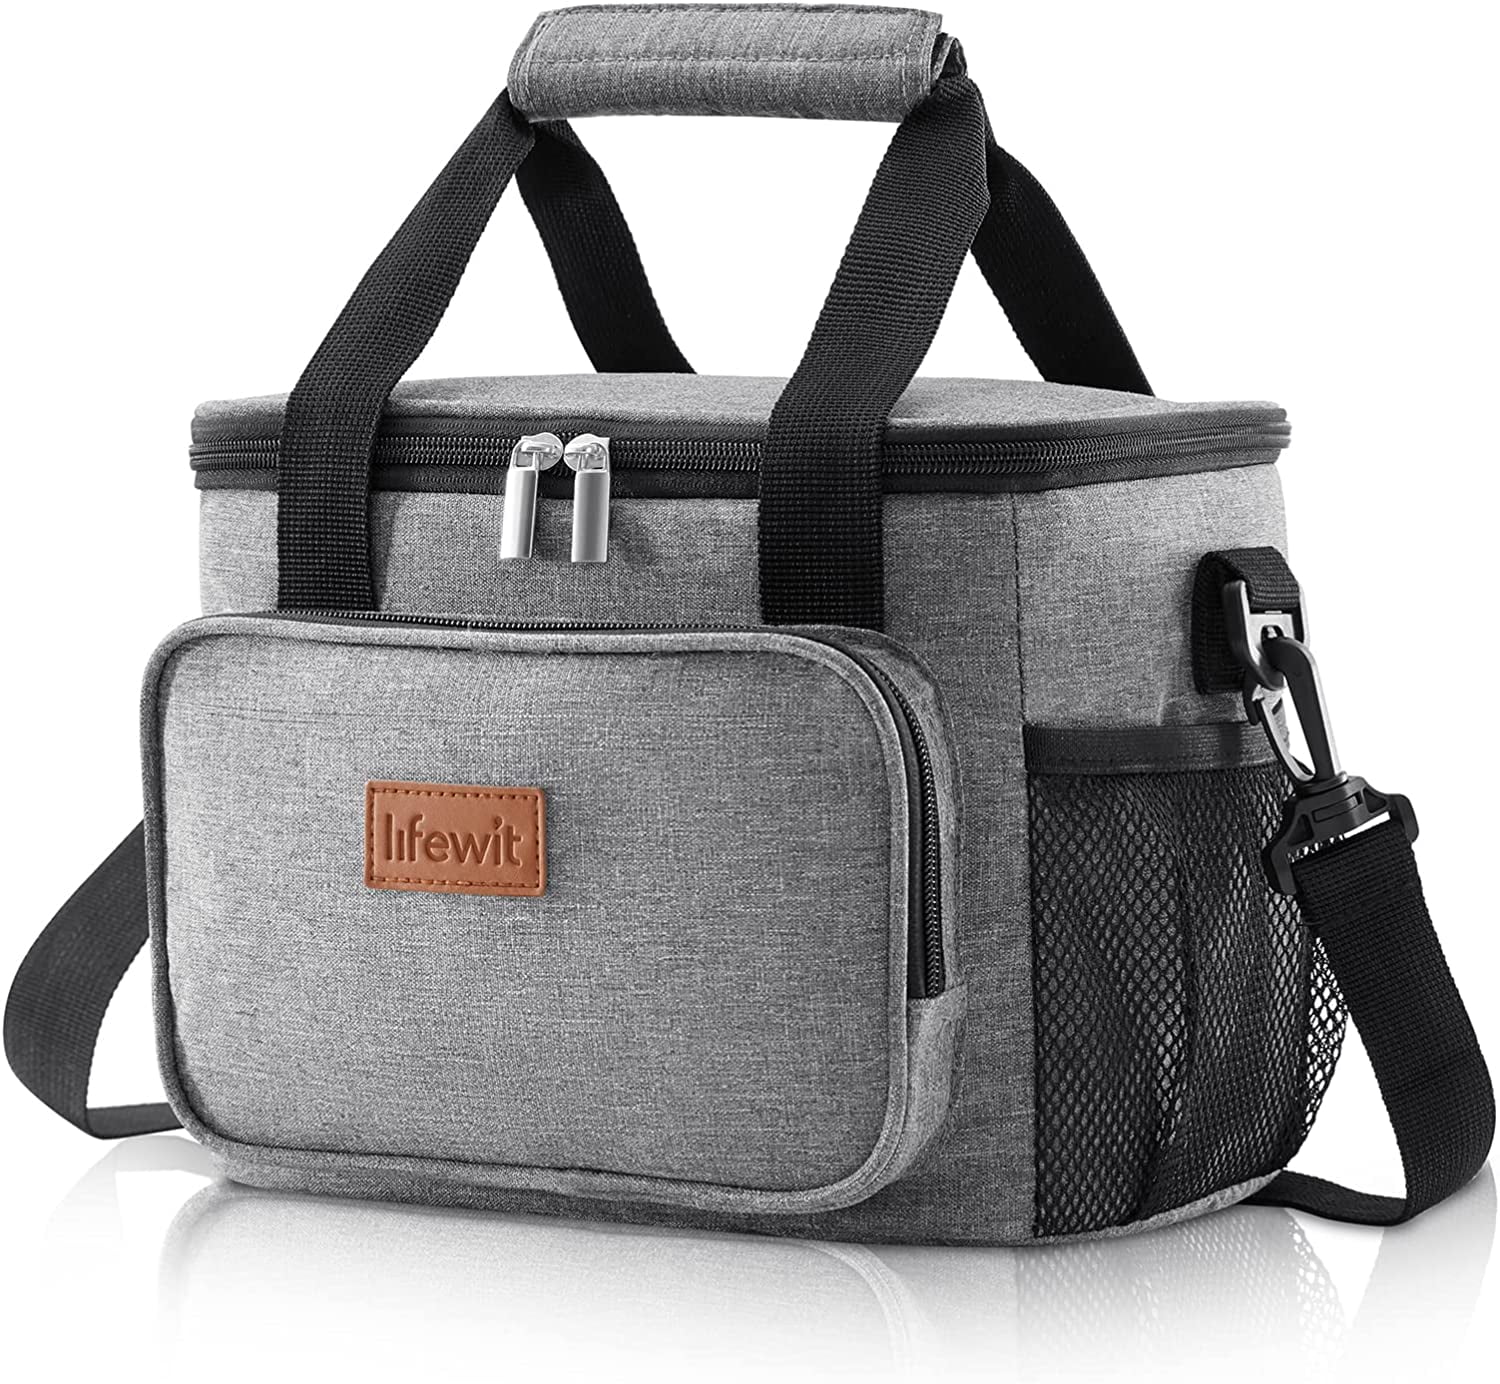 Lifewit 12-Can (8.5L) Large Lunch Bag Insulated Lunch Box Soft Cooler, Gray  Shoulder strap